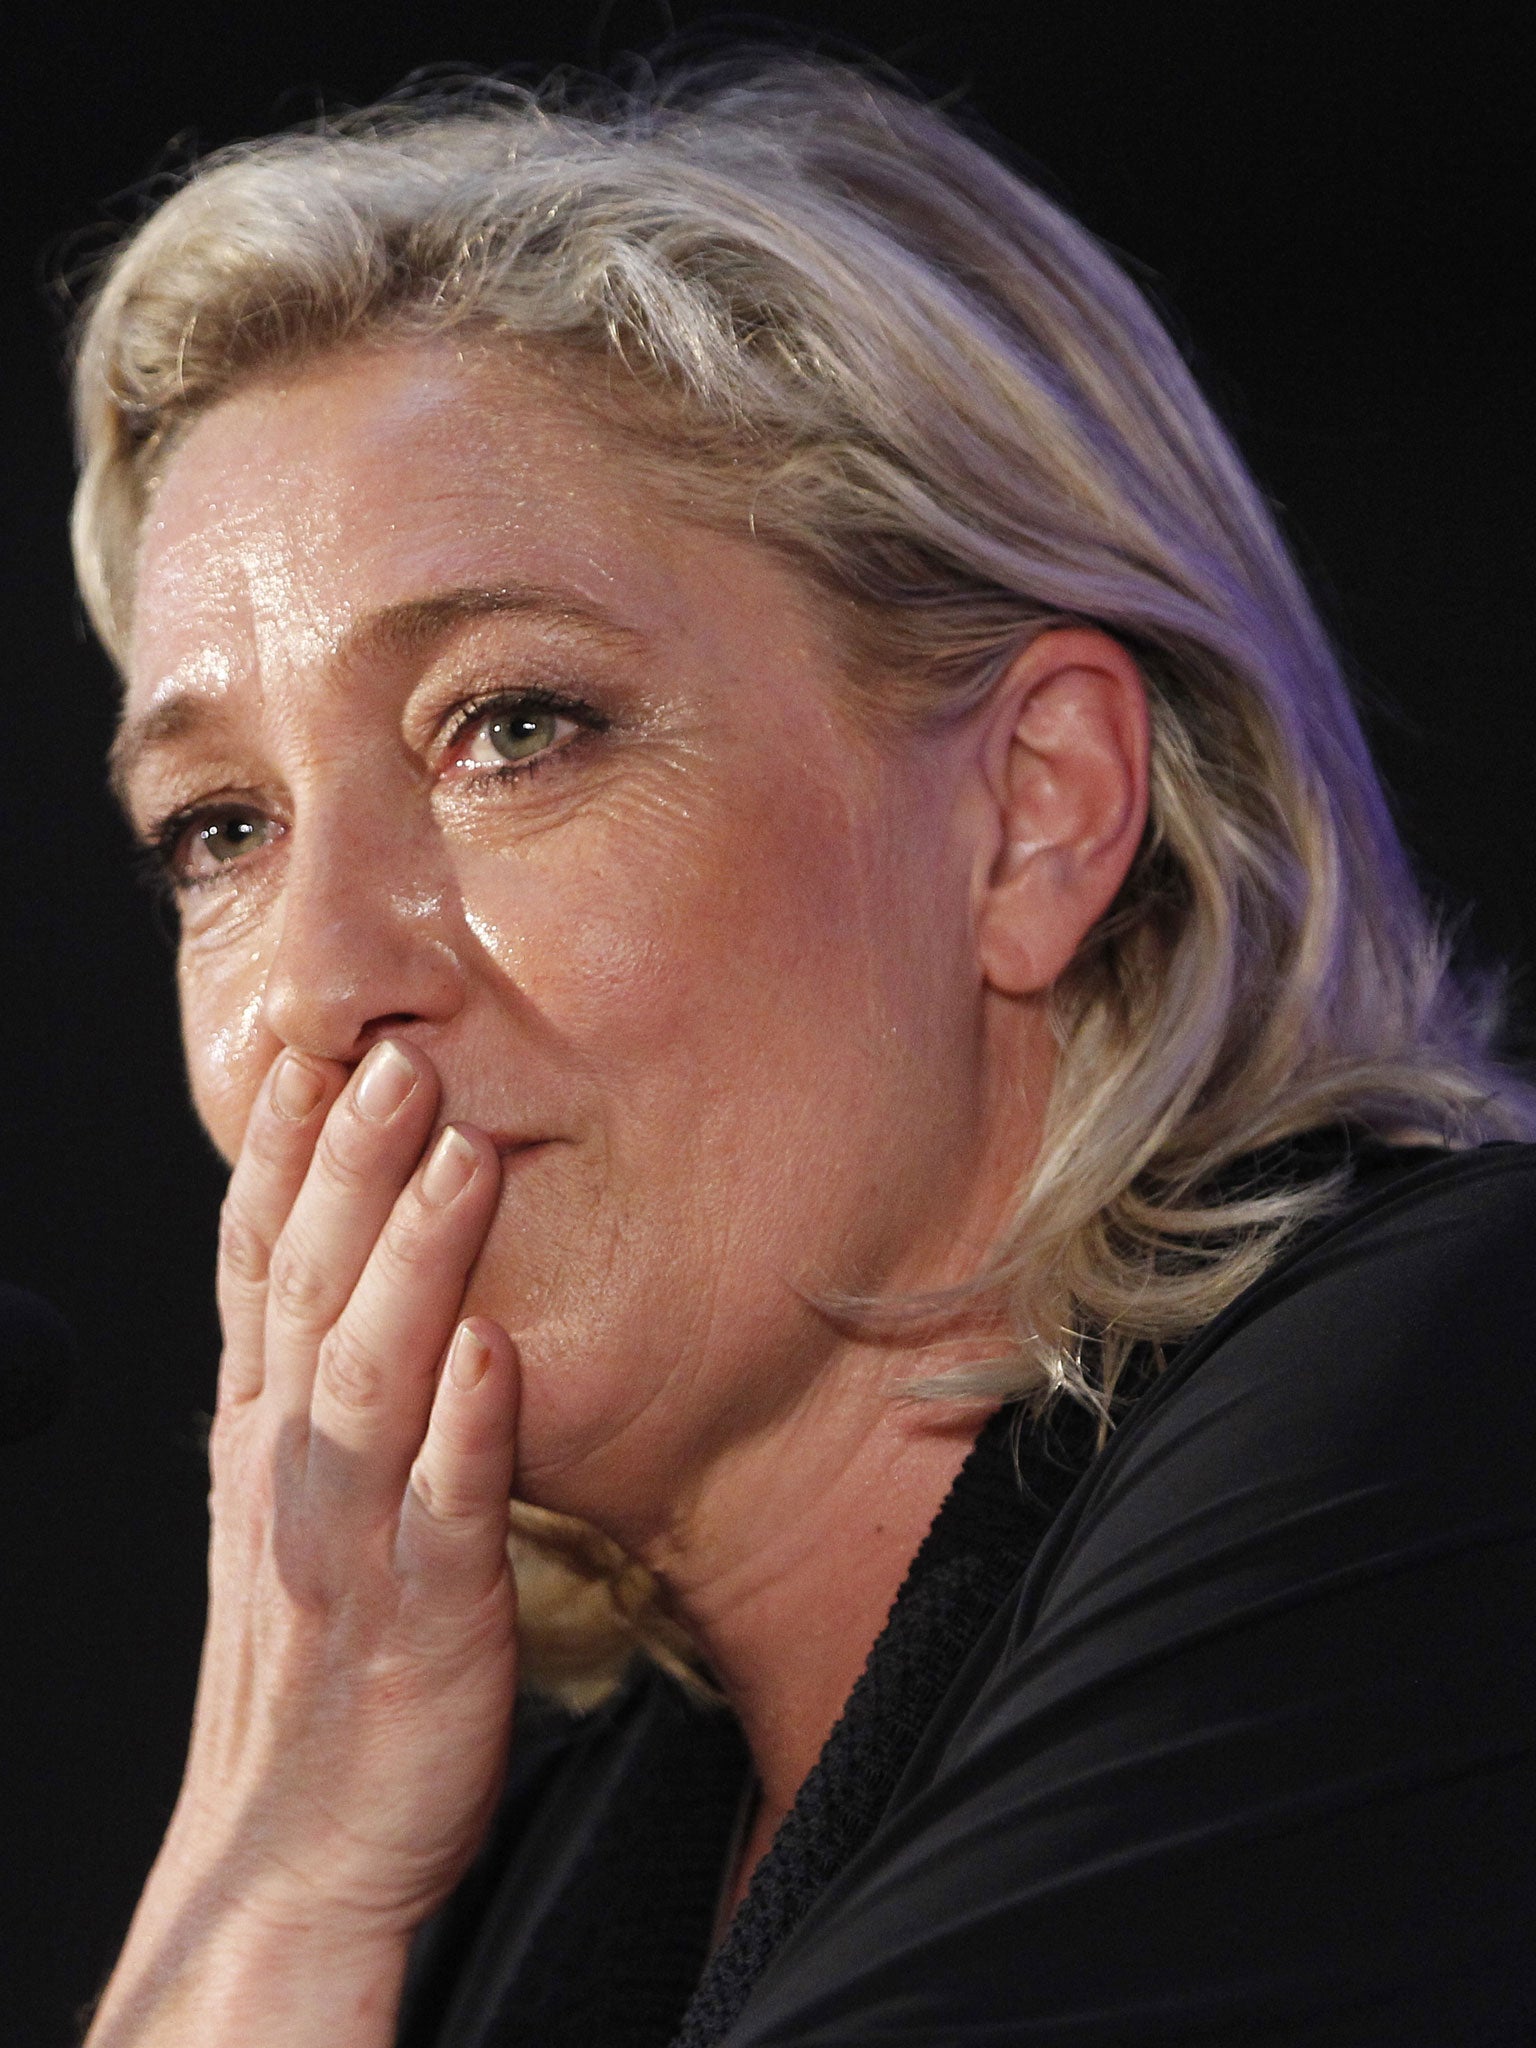 Marine Le Pen is seriously injured after fracturing her spine in a fall